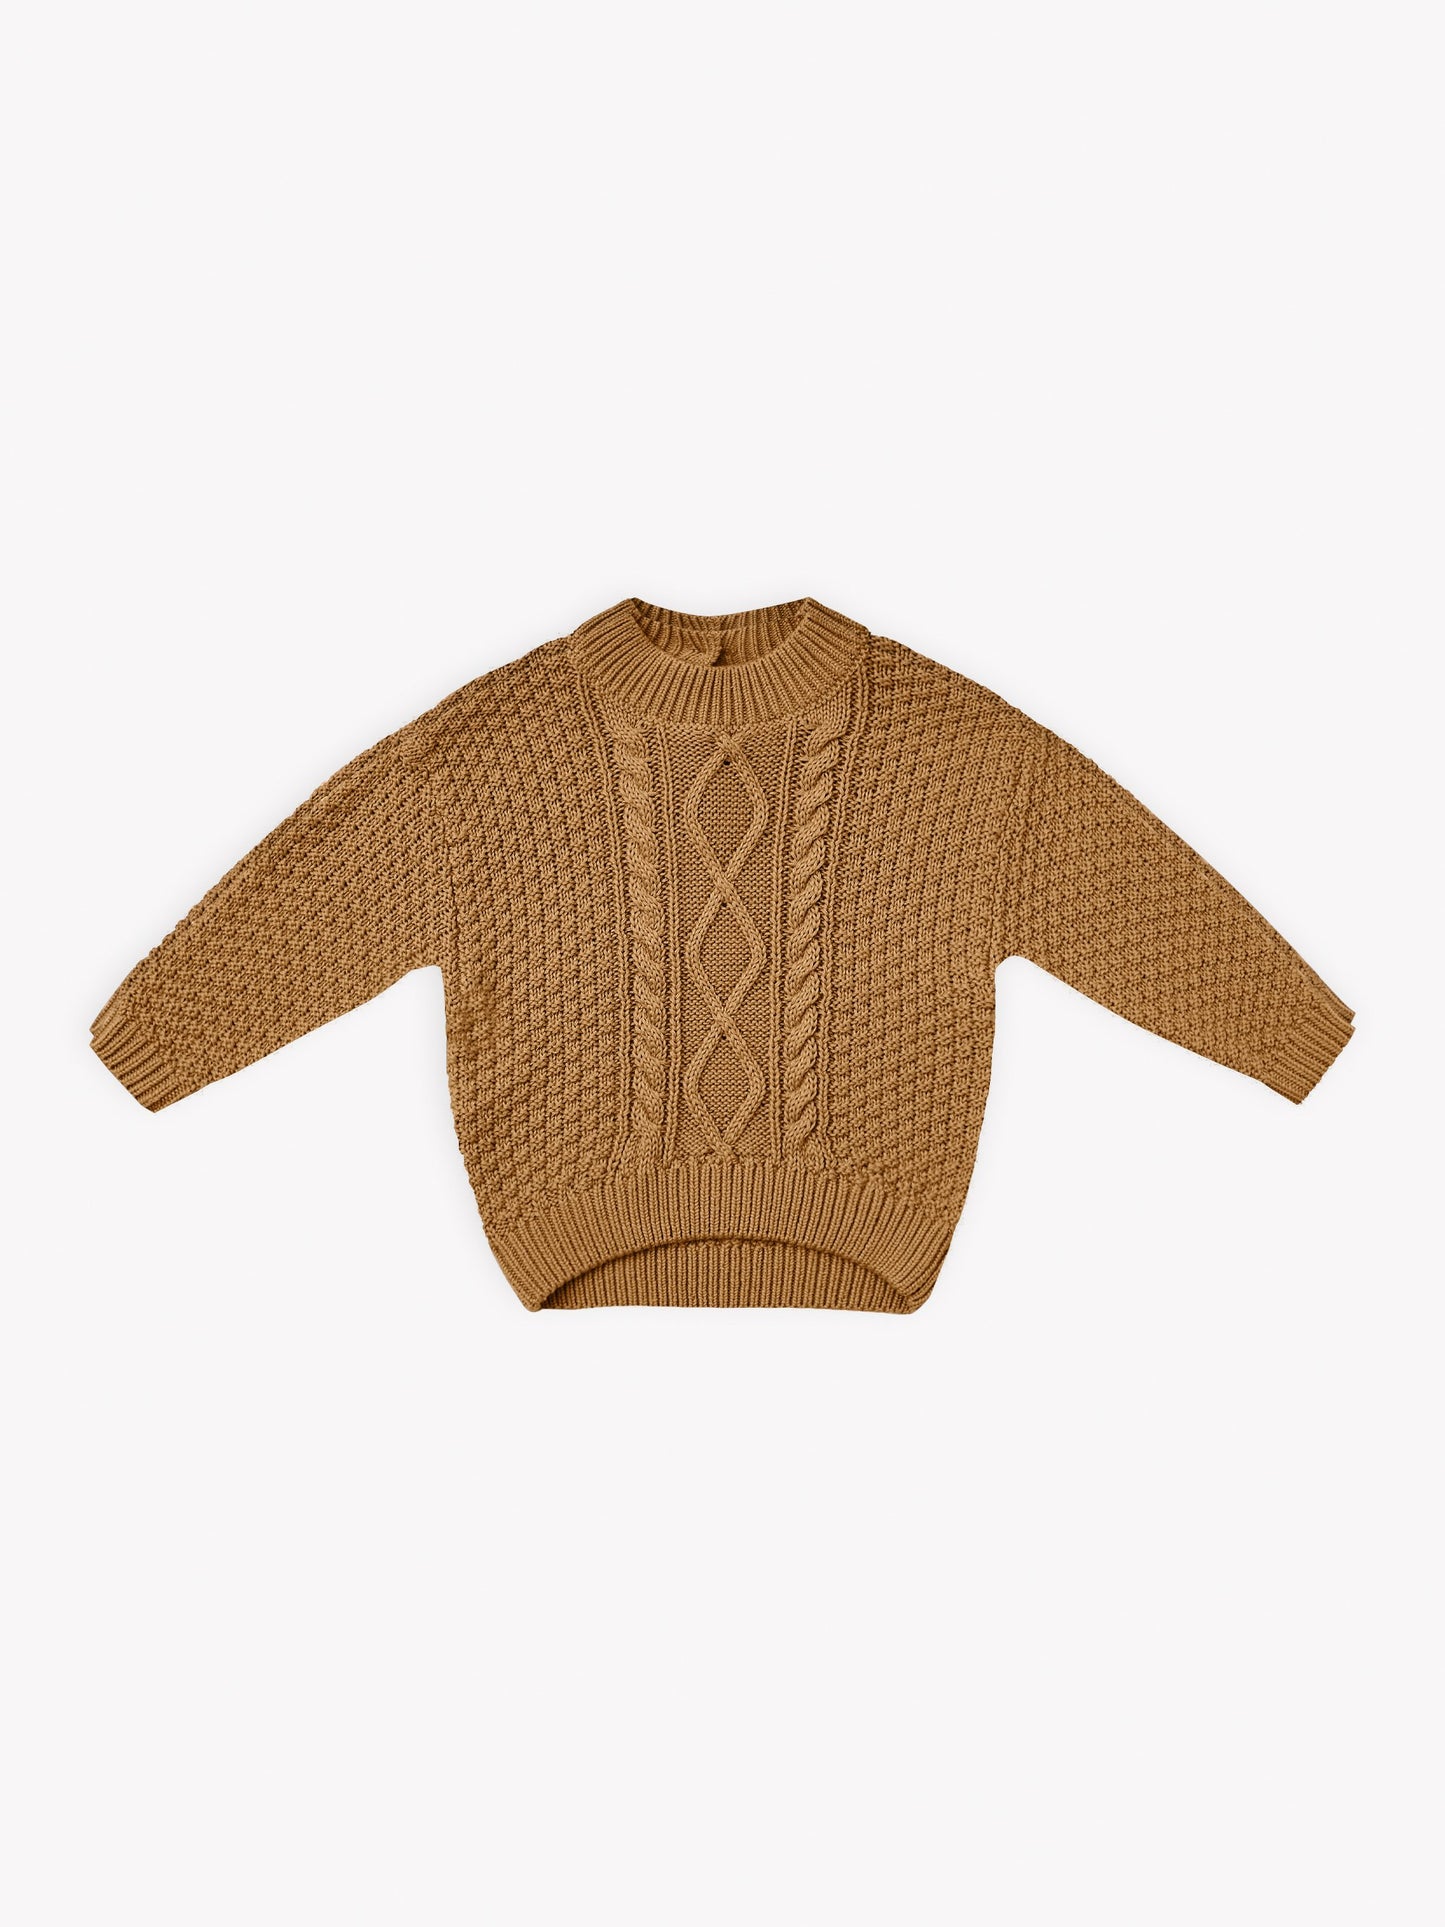 Cable Knit Sweater in Walnut  - Doodlebug's Children's Boutique